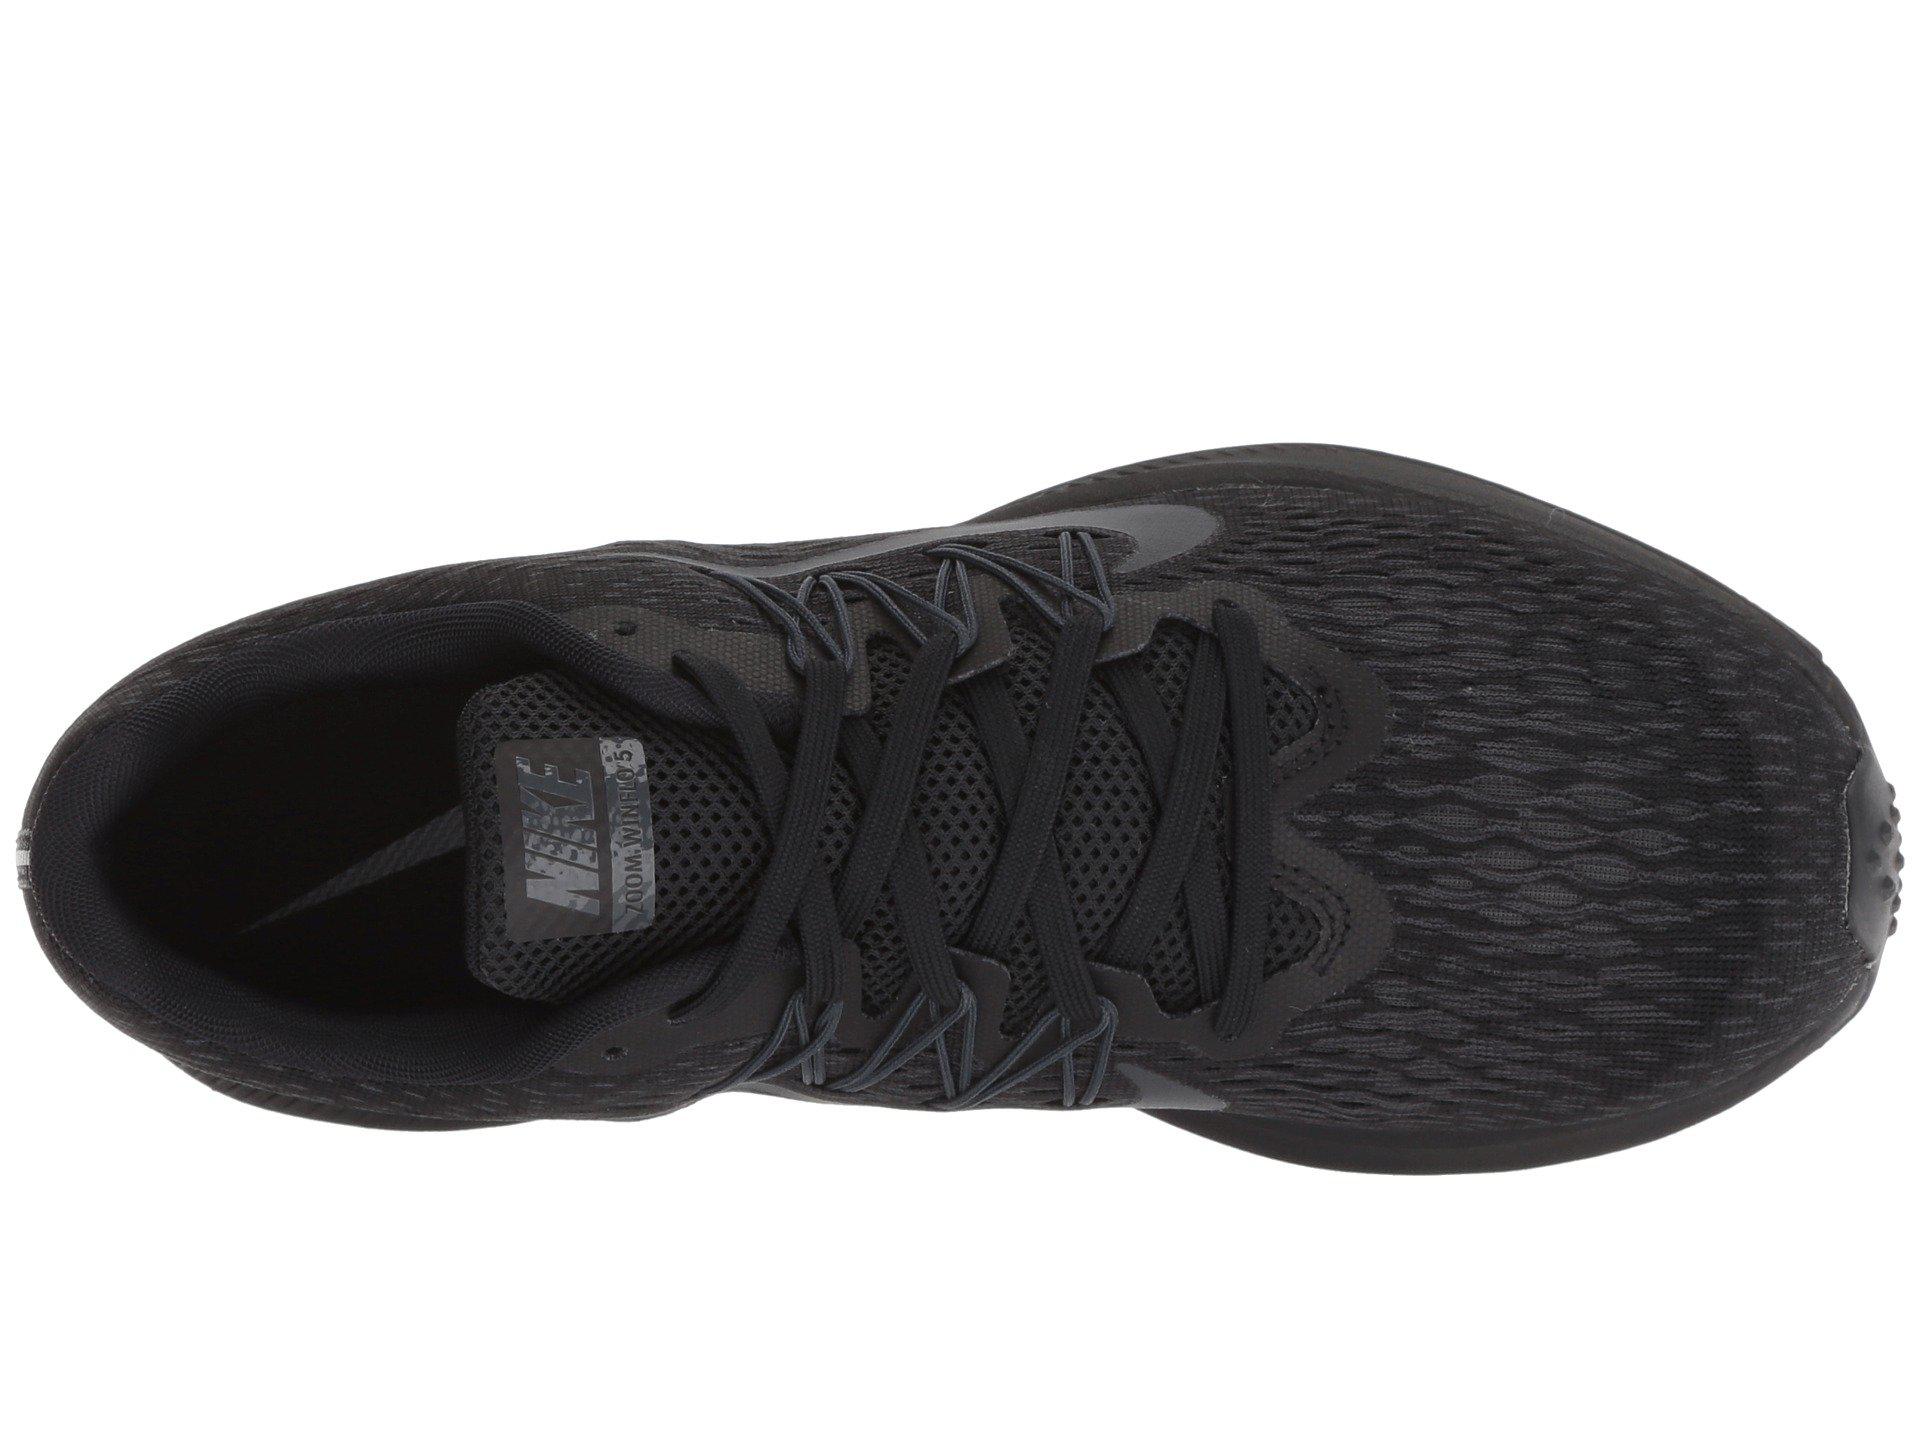 Nike Rubber Air Zoom Winflo 5 (black/anthracite) Running Shoes | Lyst